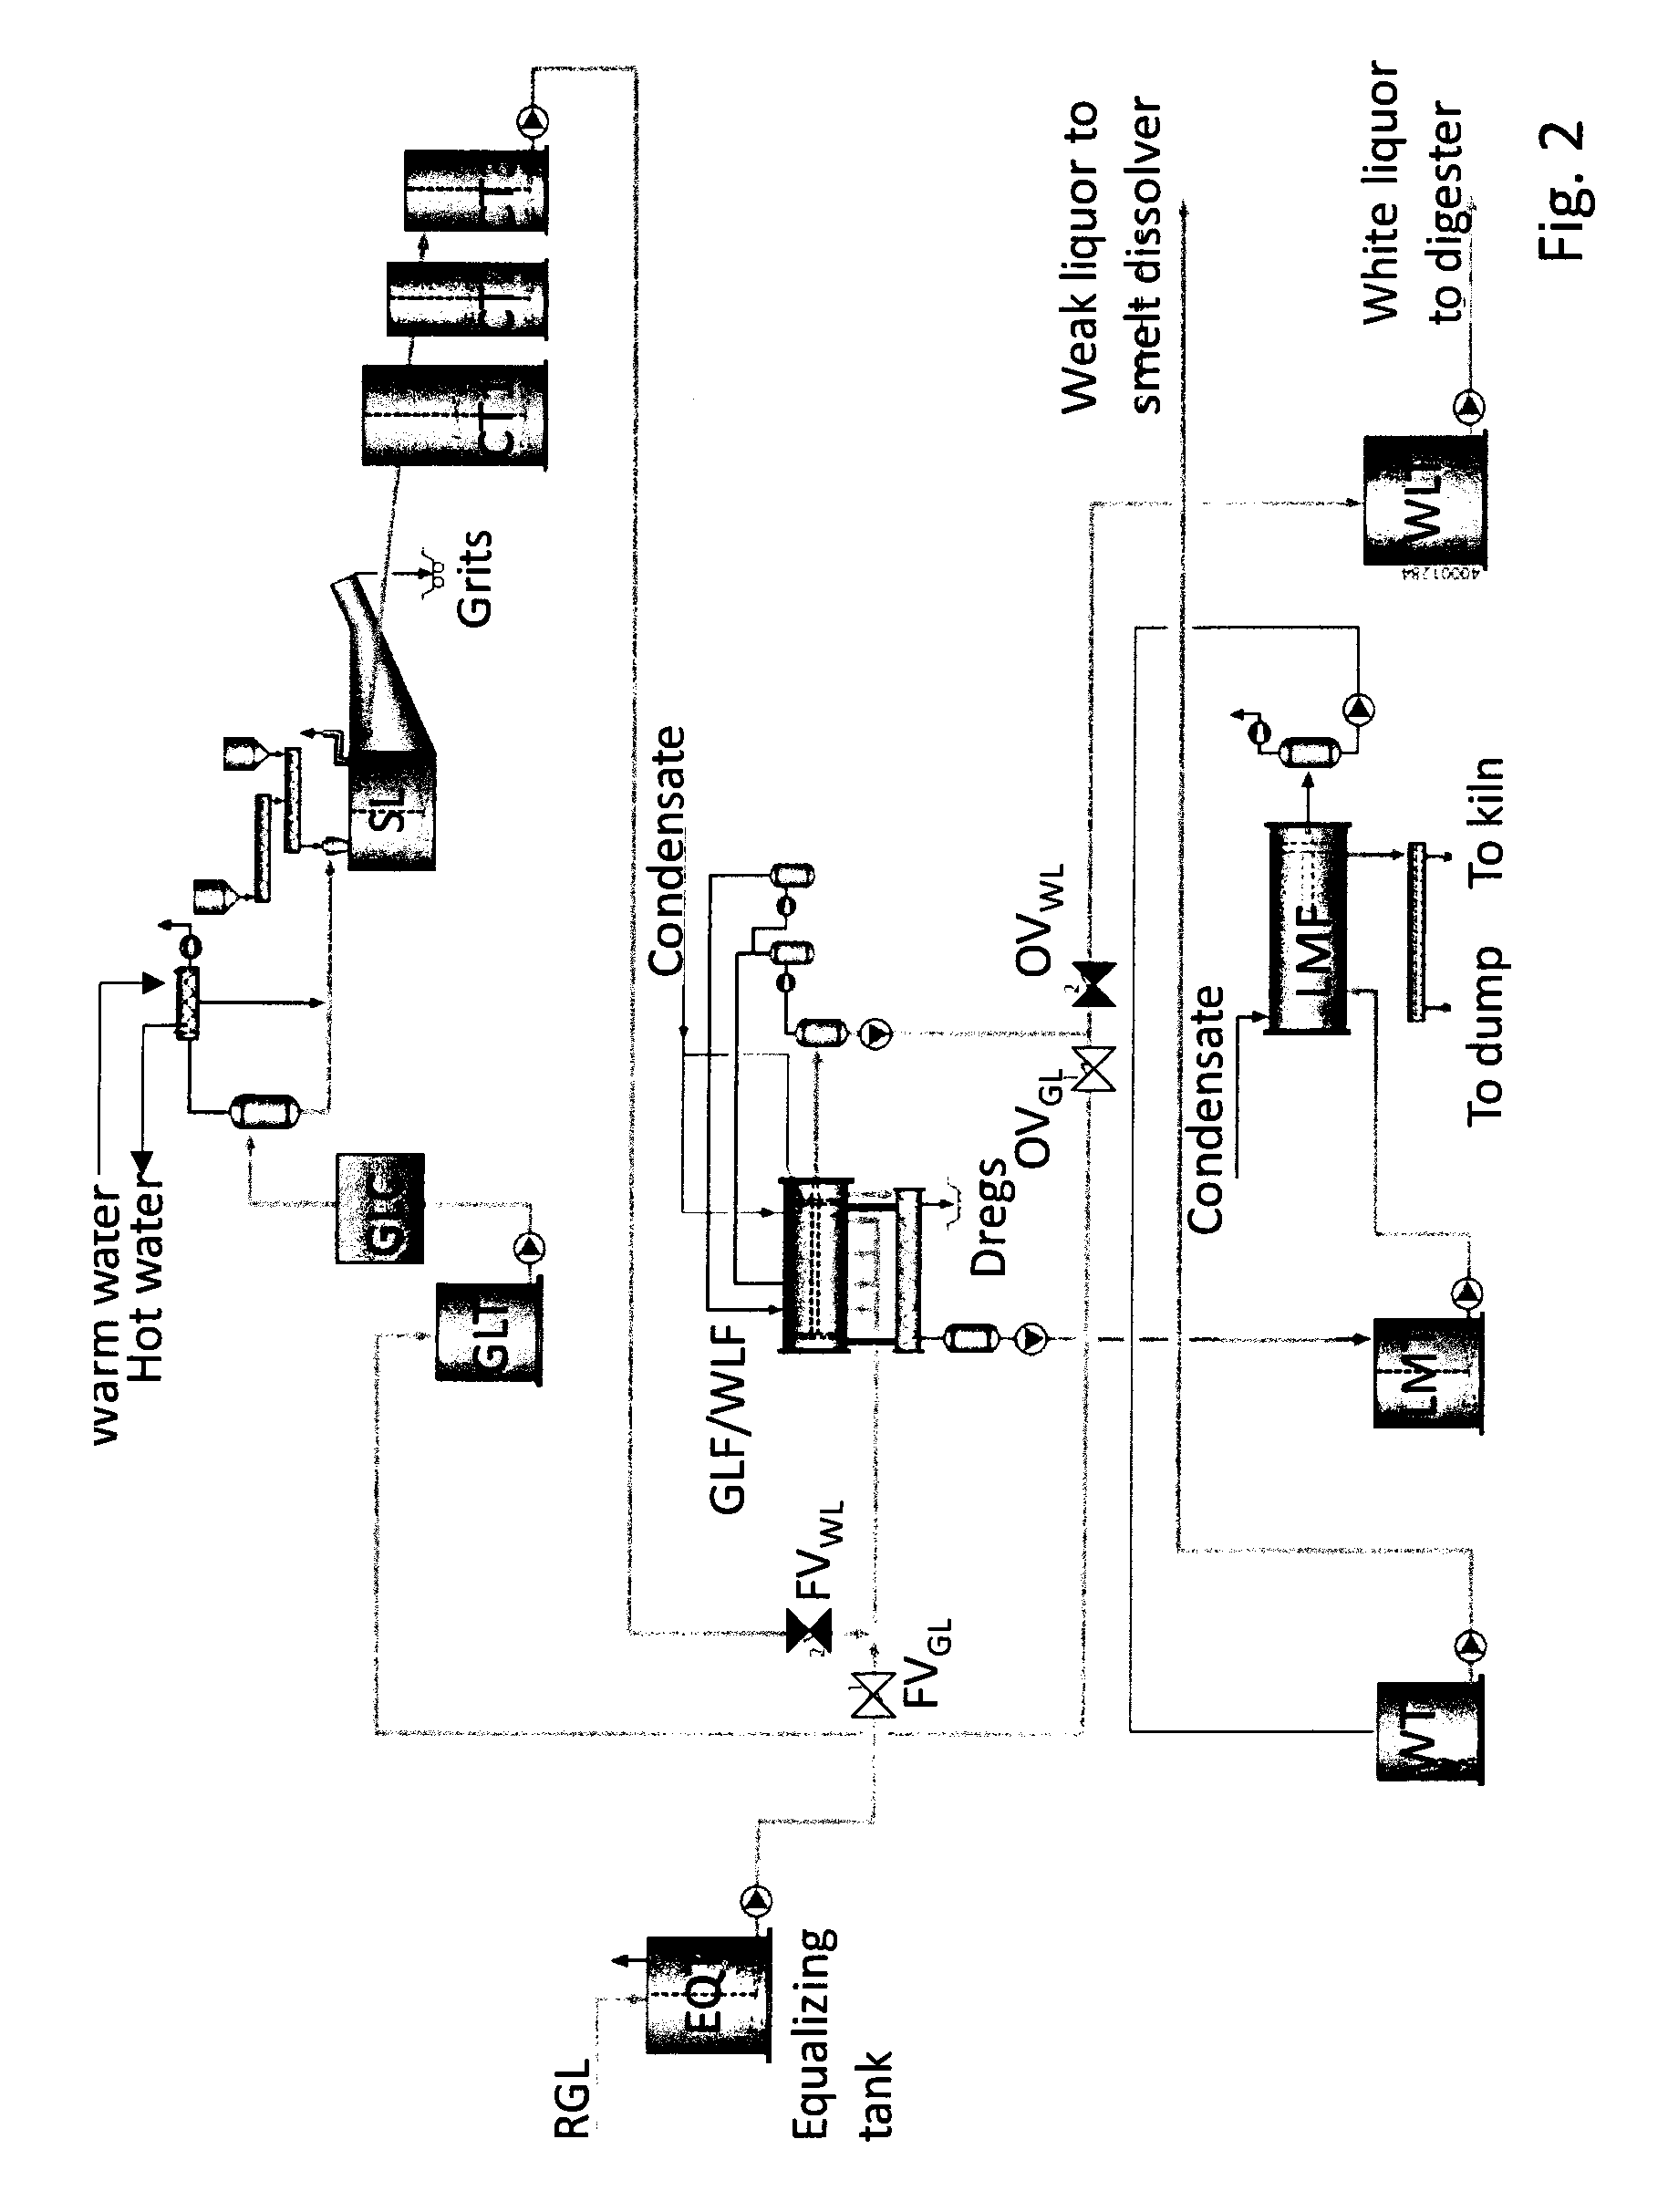 Method for the causticizing process for producing white liquor